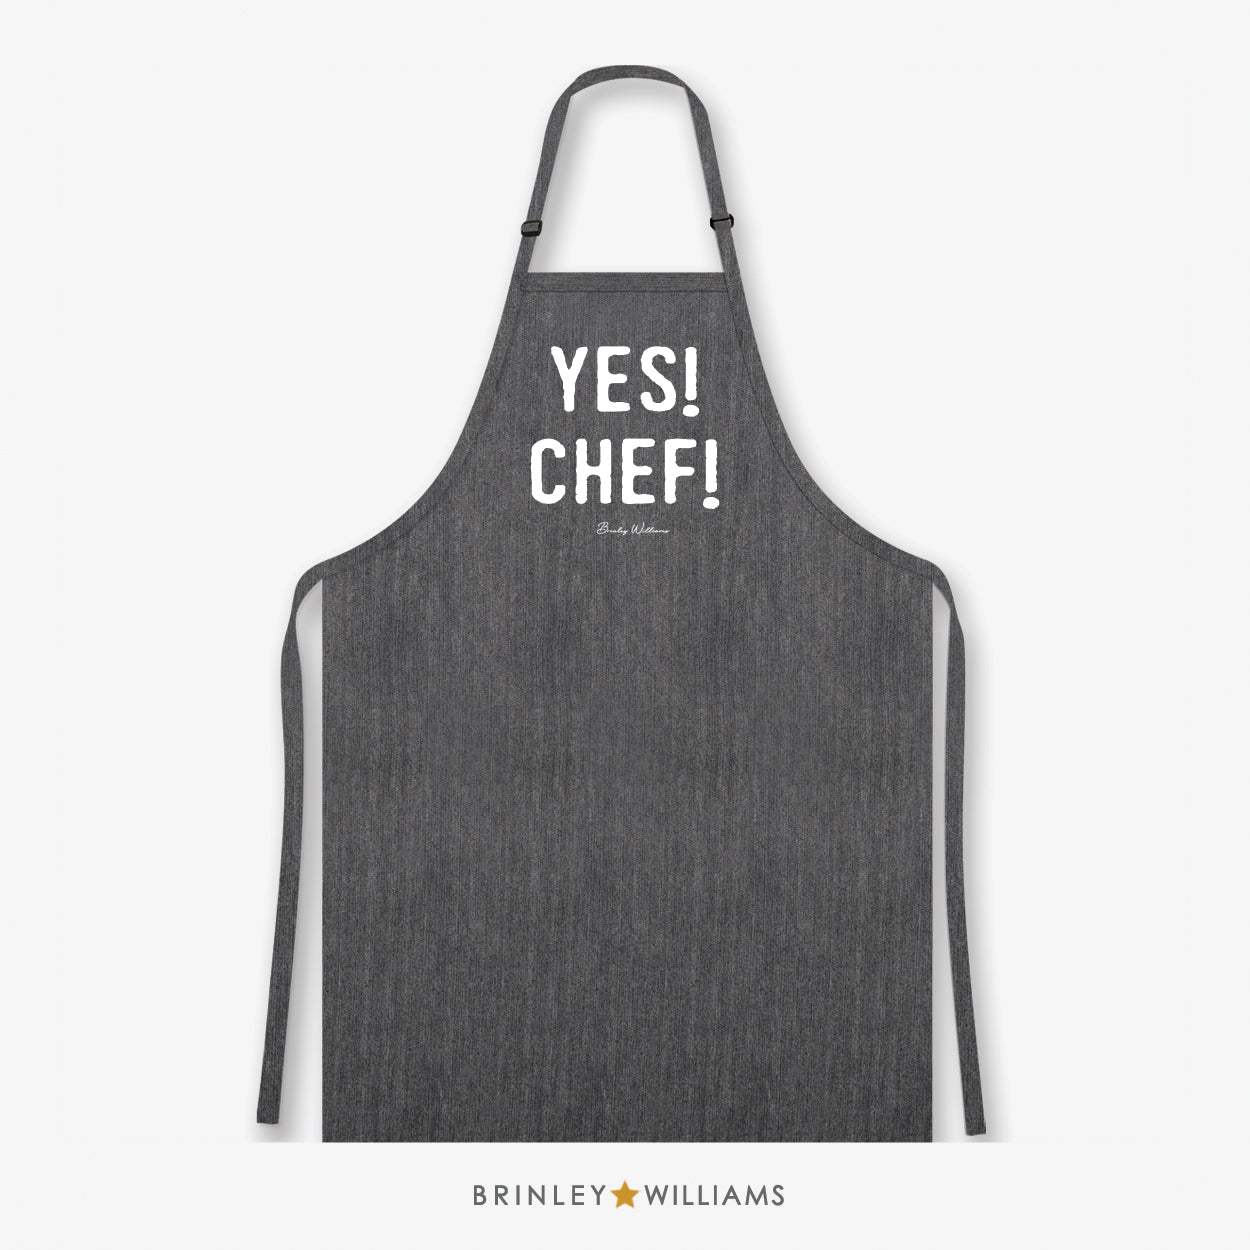 Yes! Chef! Apron - Zoom out